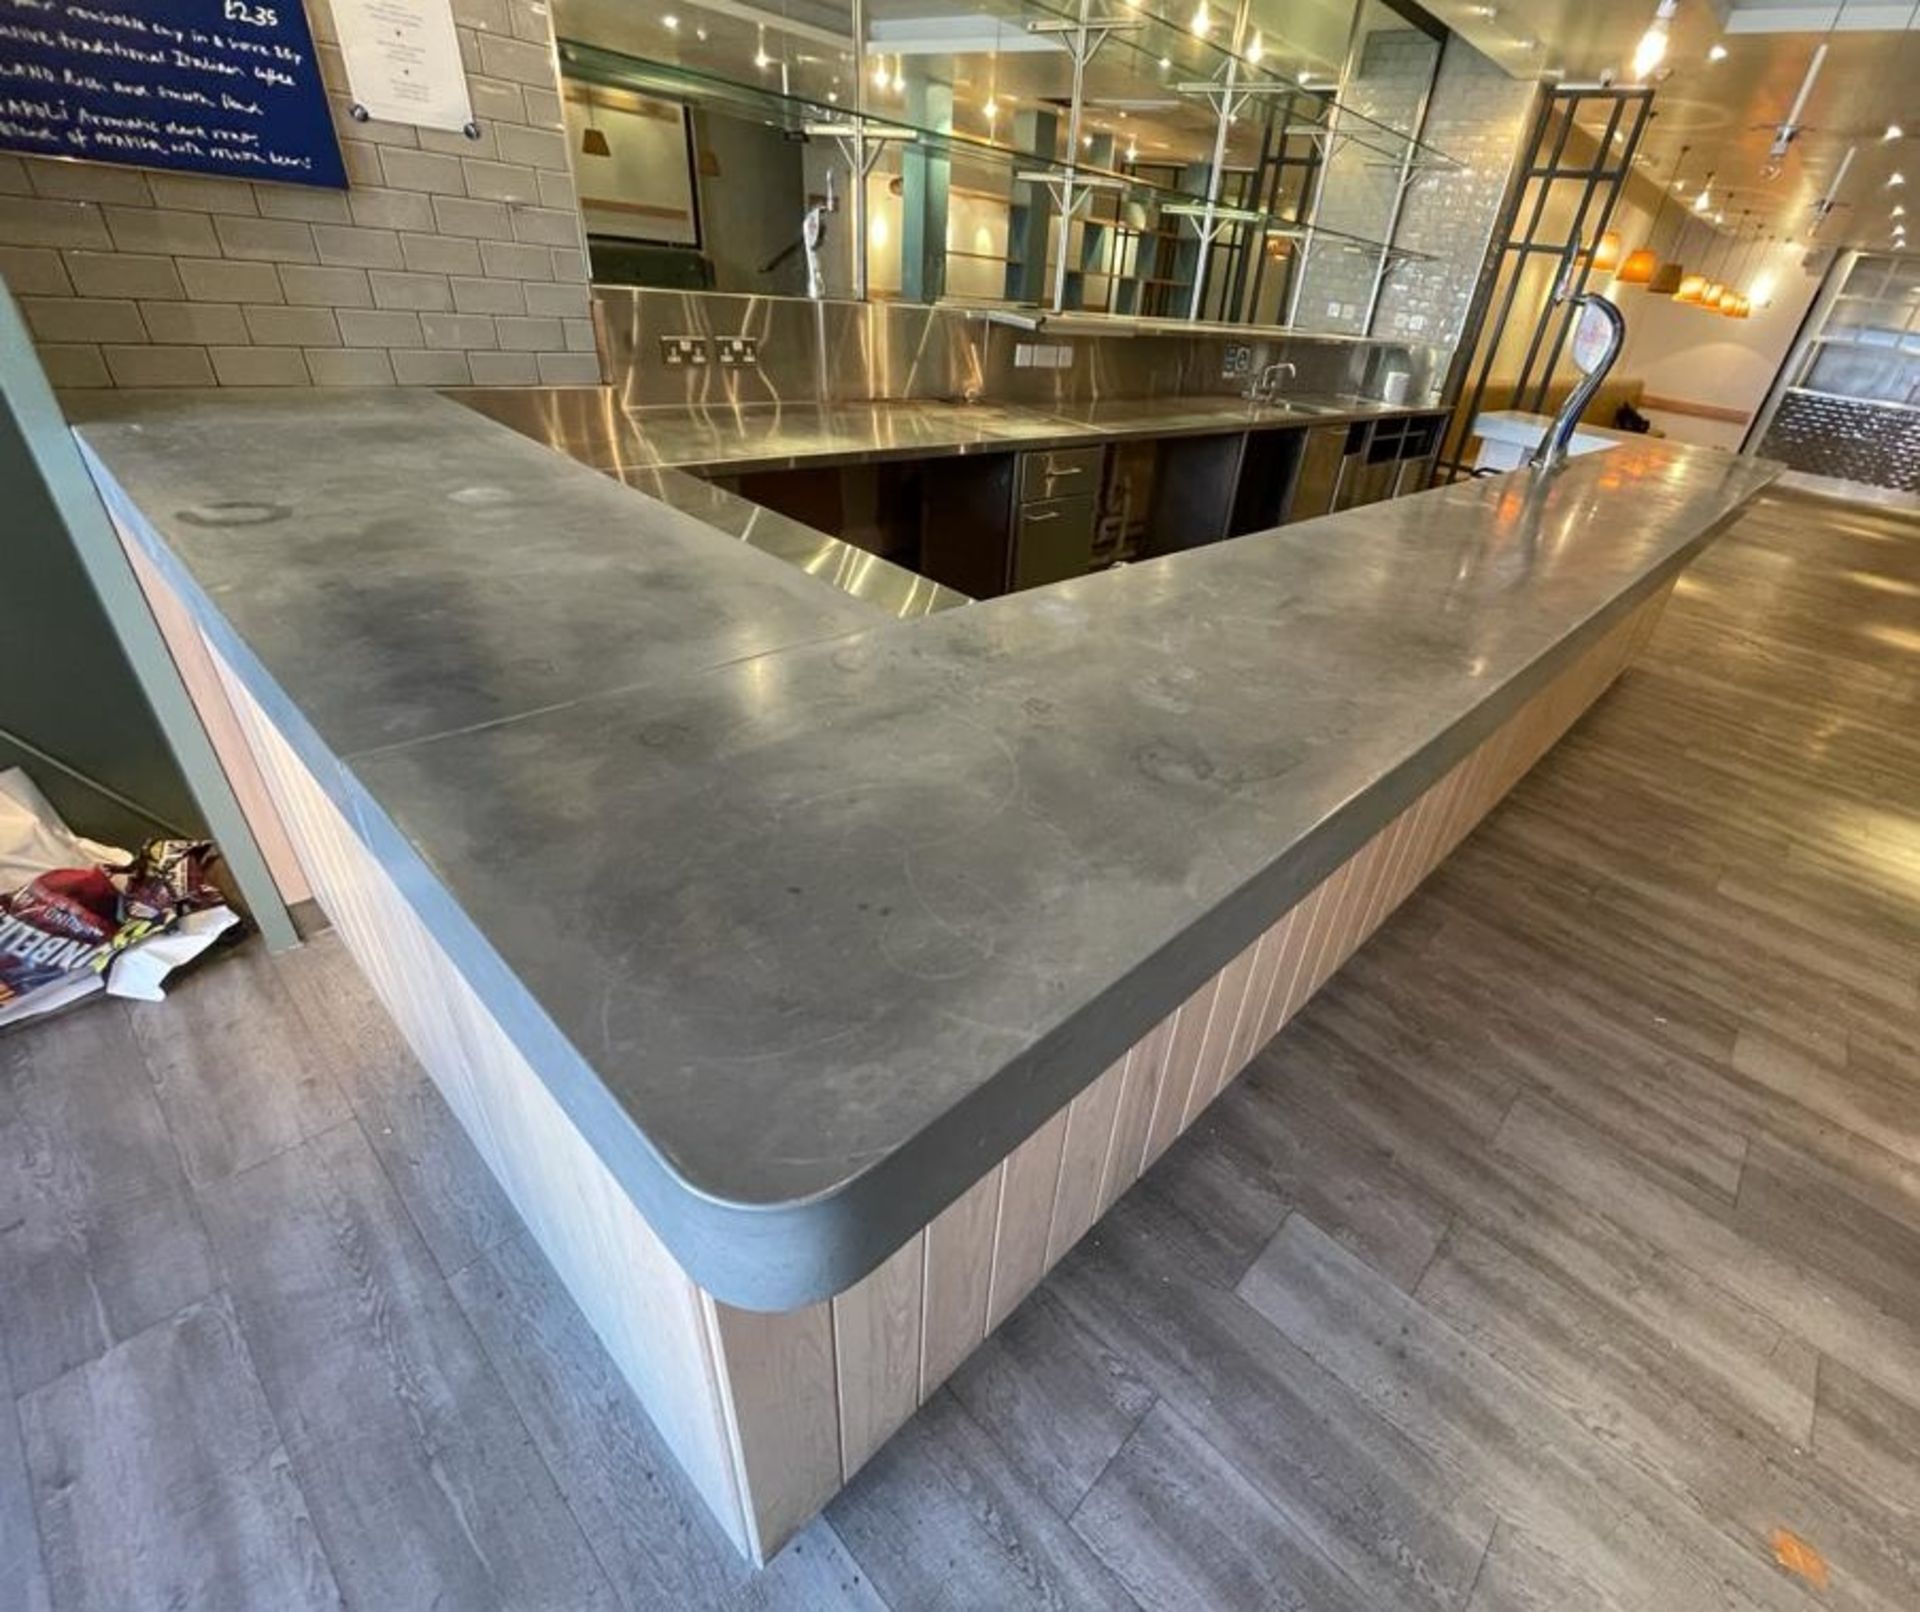 1 x Contemporary Restaurant Bar With Light Wood Panel Fascia, Sheet Metal Covered Bar Top, - Image 33 of 57